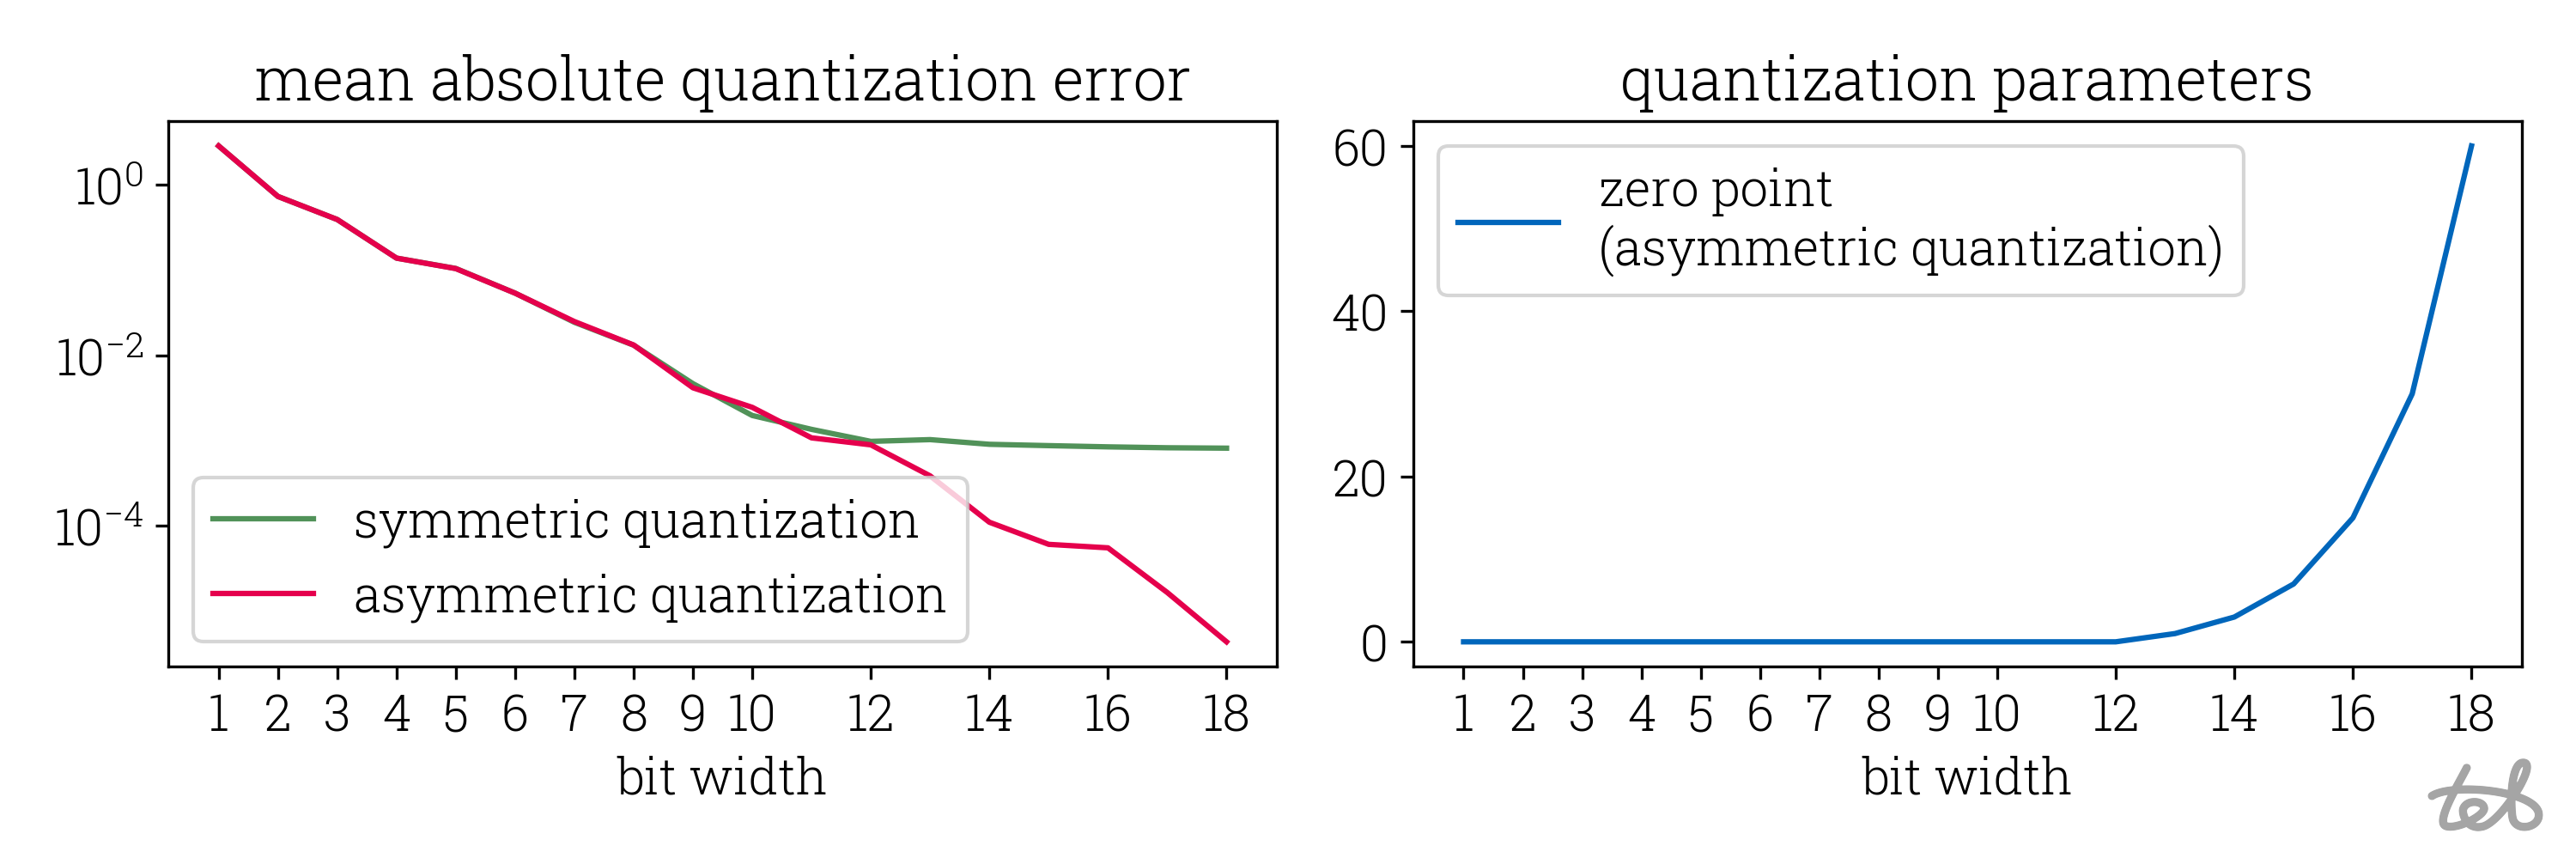 Graph showing the mean absolute quantization error of an example tensor as well as the used zero point for different bit widths